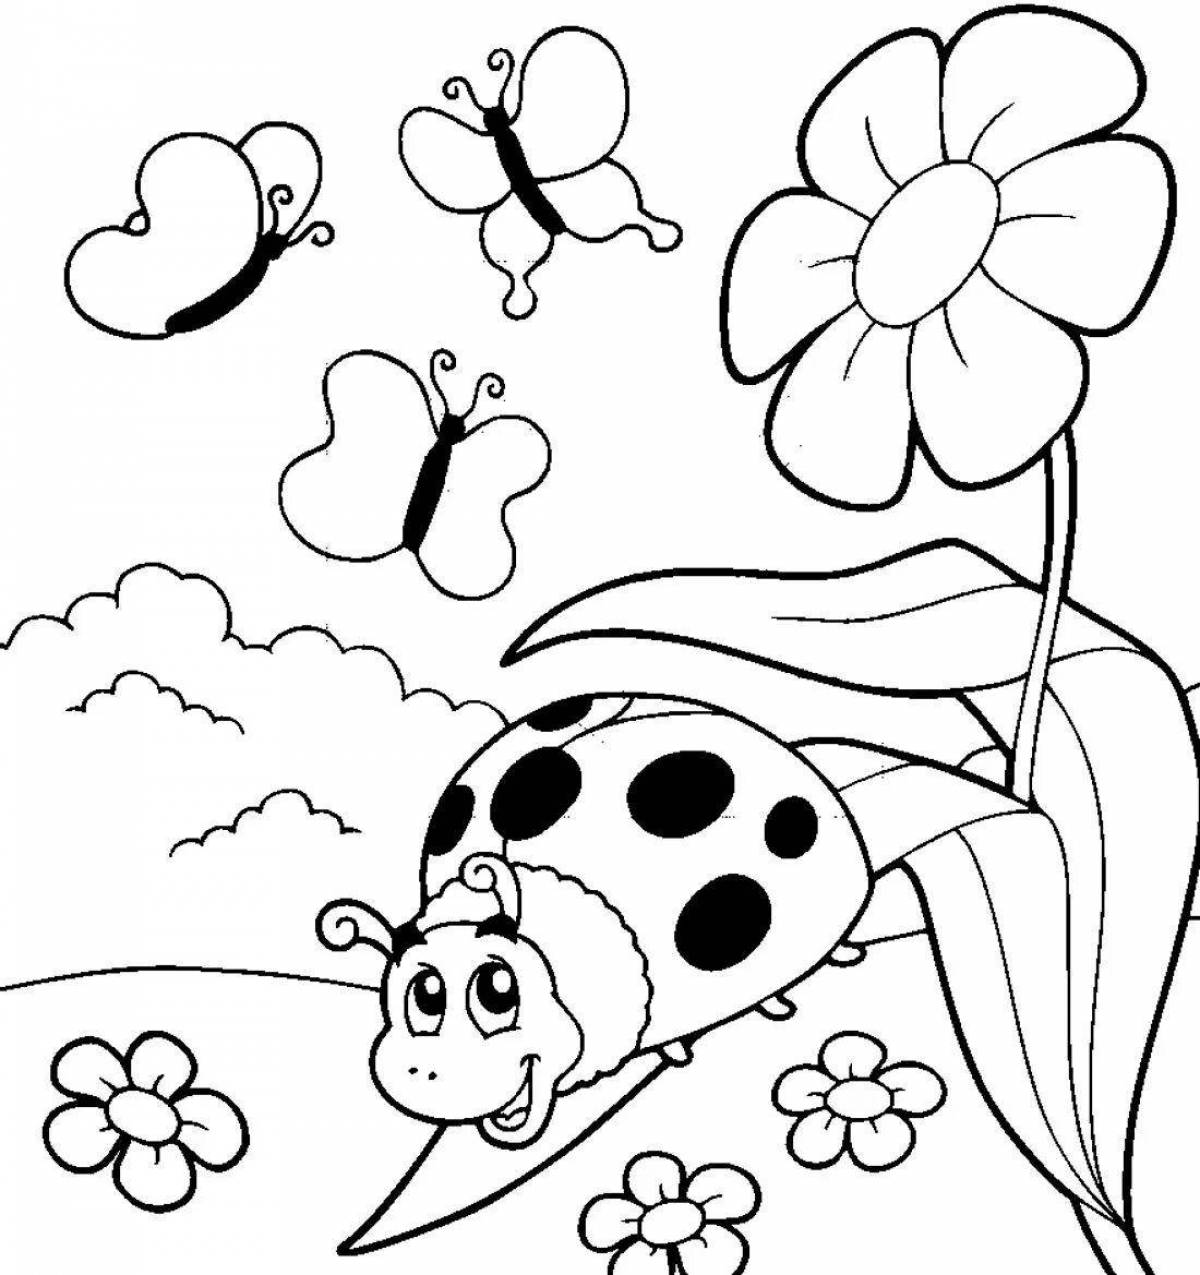 Magic ladybug coloring book for kids 6-7 years old